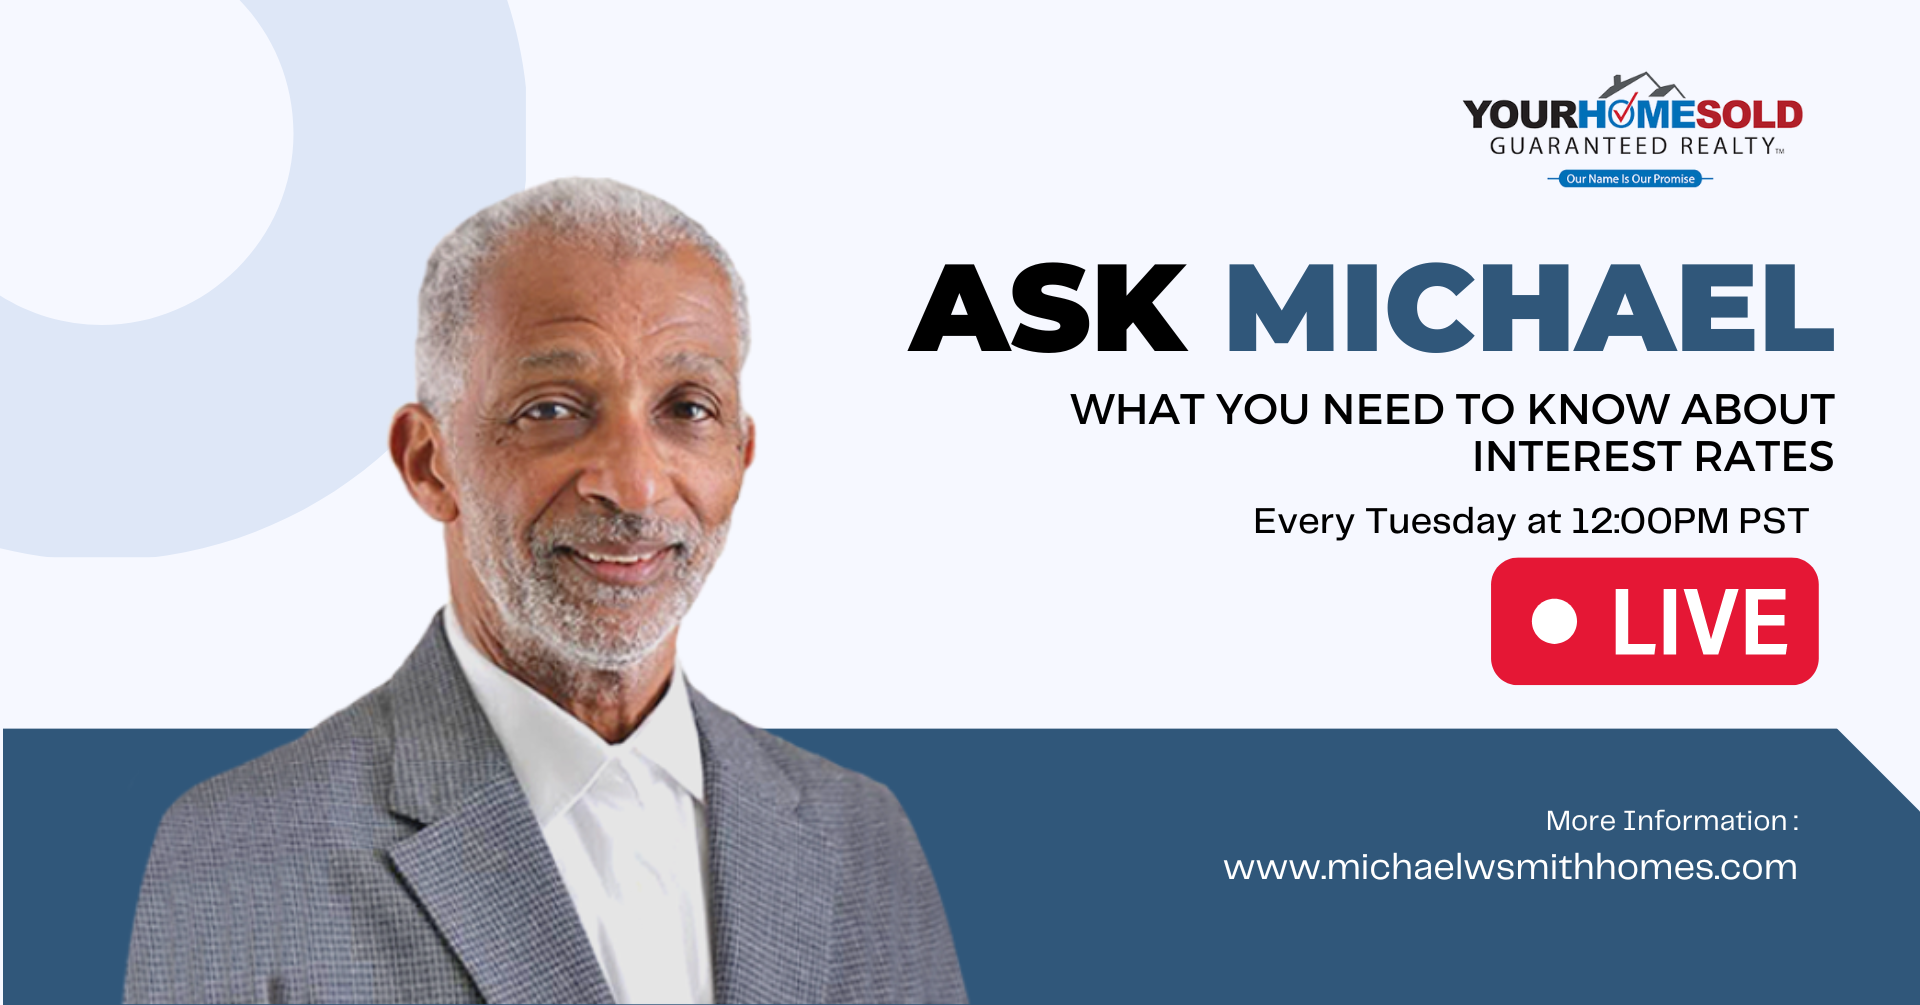 #ASKMICHAEL - EP2: Interest rates are going up! Here's what you need to know...